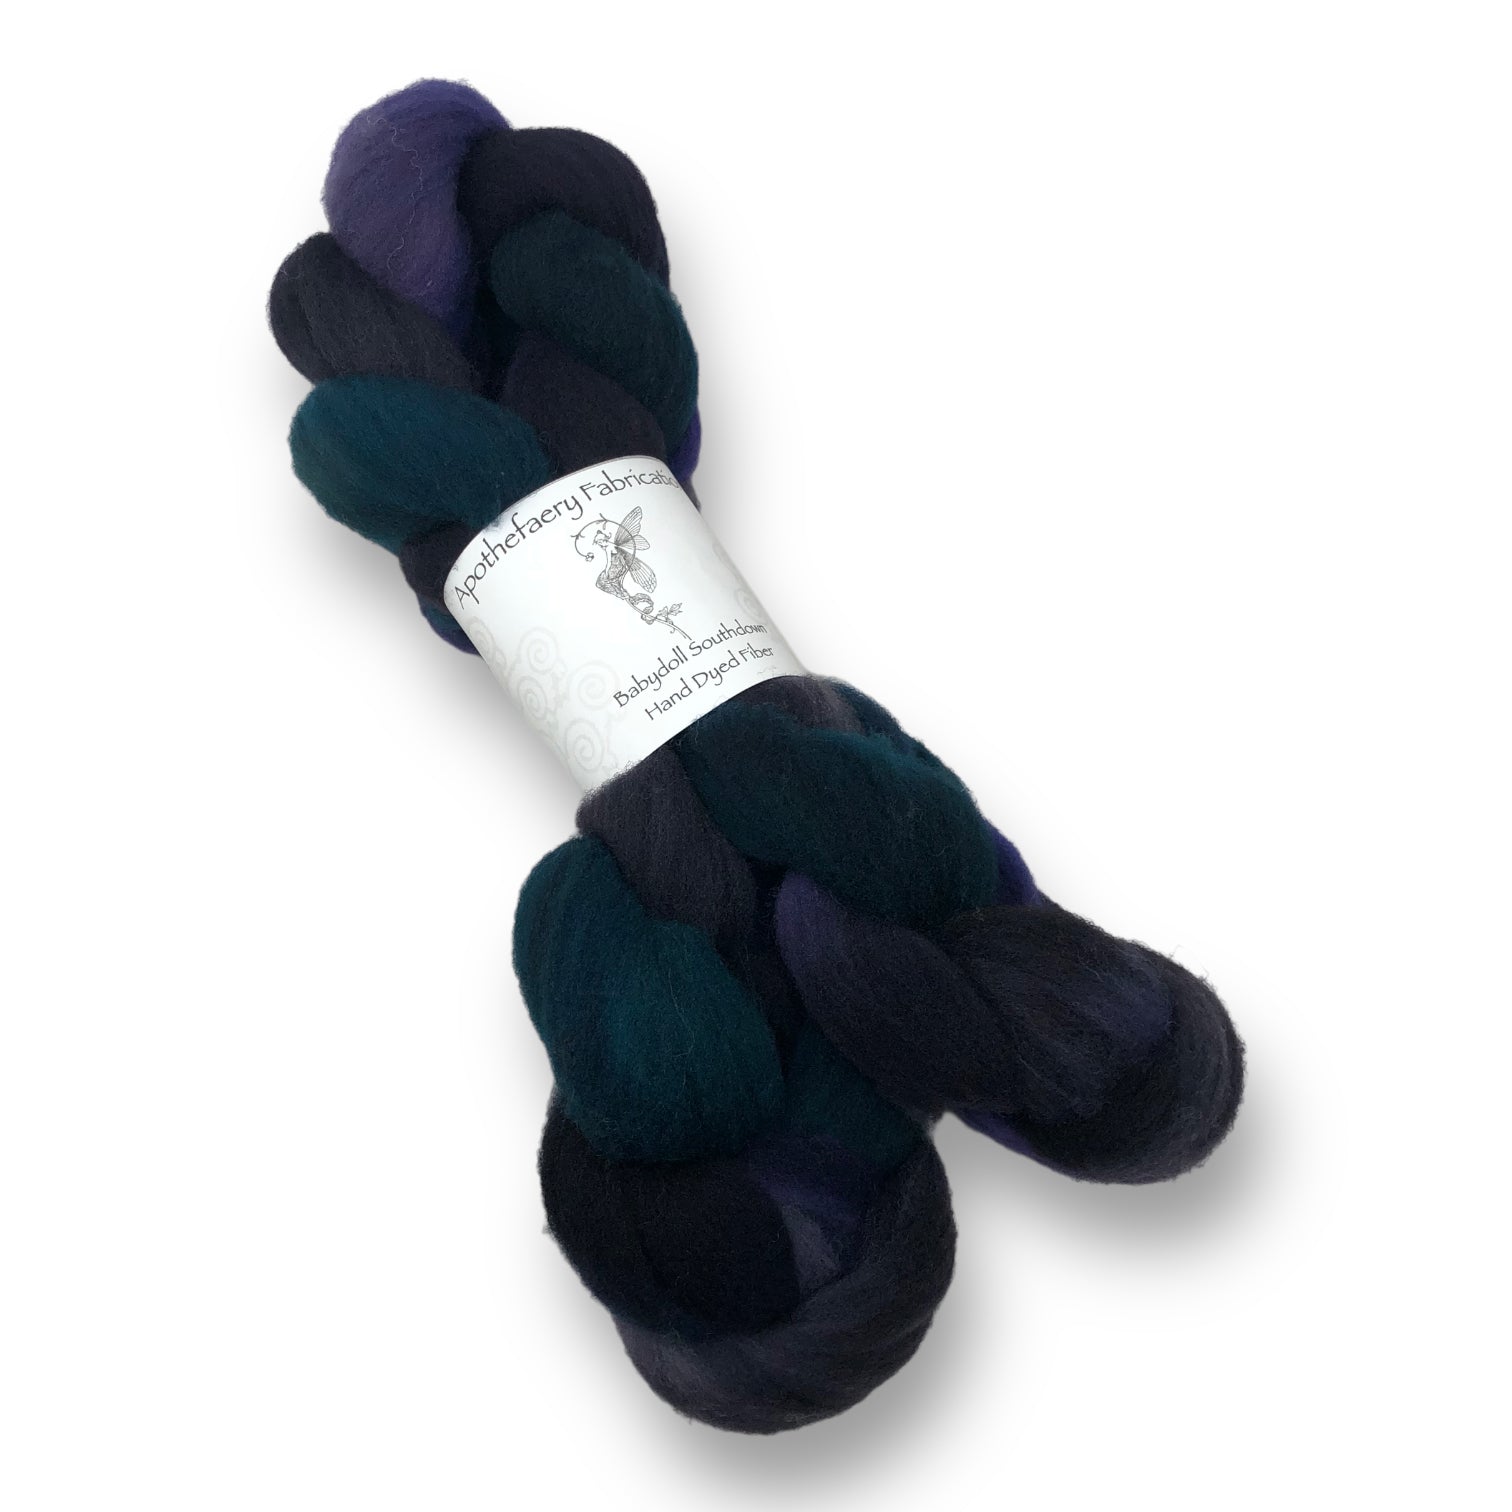 Darkness - Babydoll Southdown wool